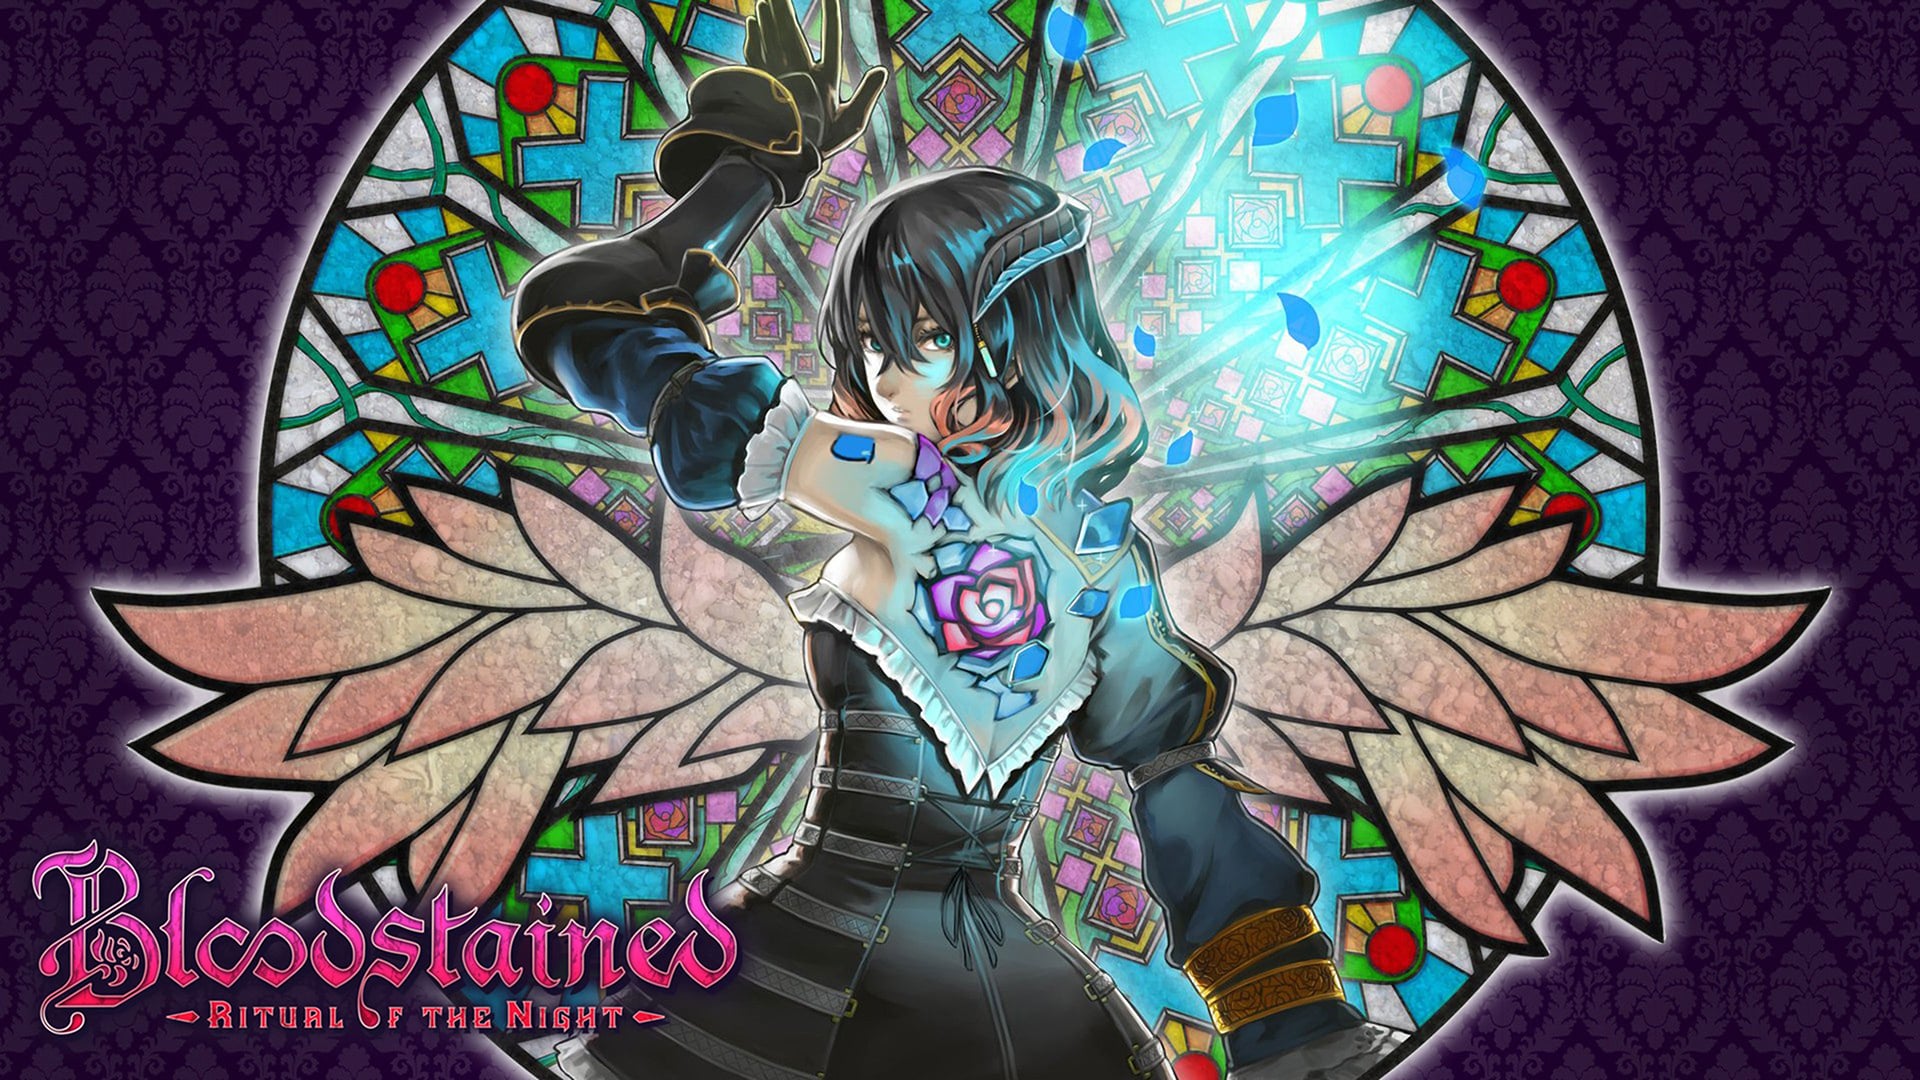 Bloodstained: Ritual of the Night 2